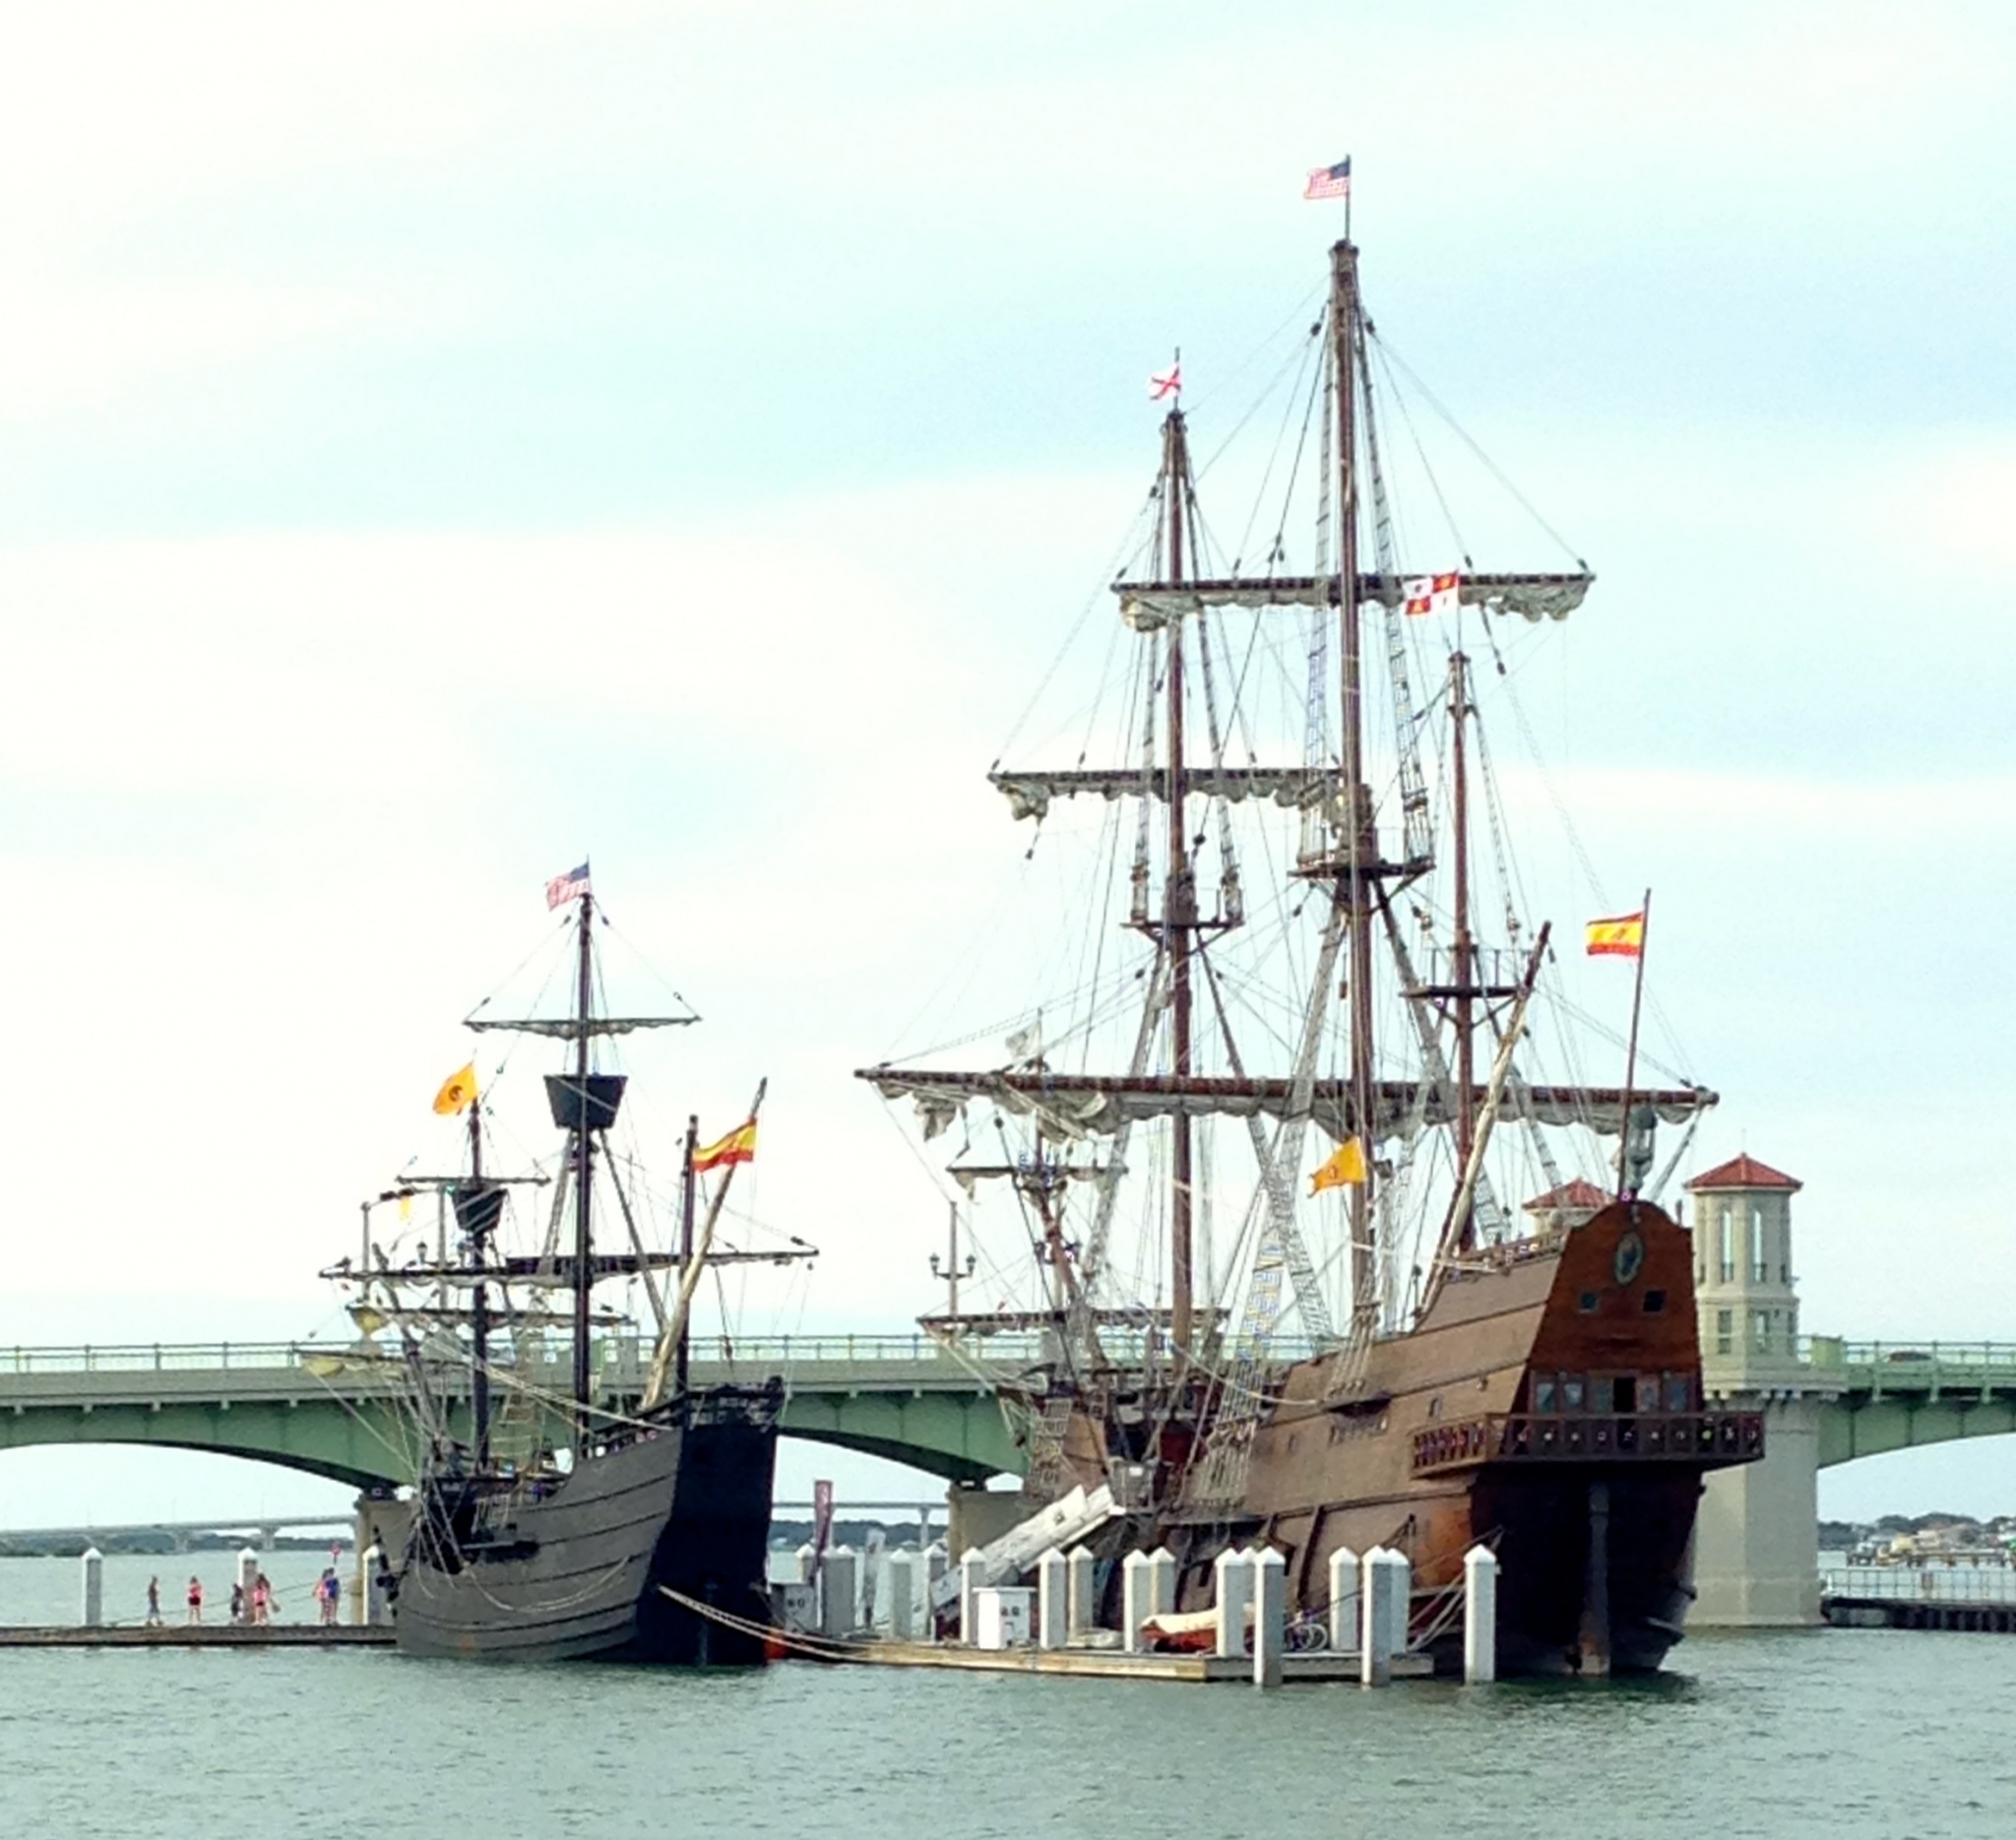 El Galeon and the Nao Victoria in St Augustine